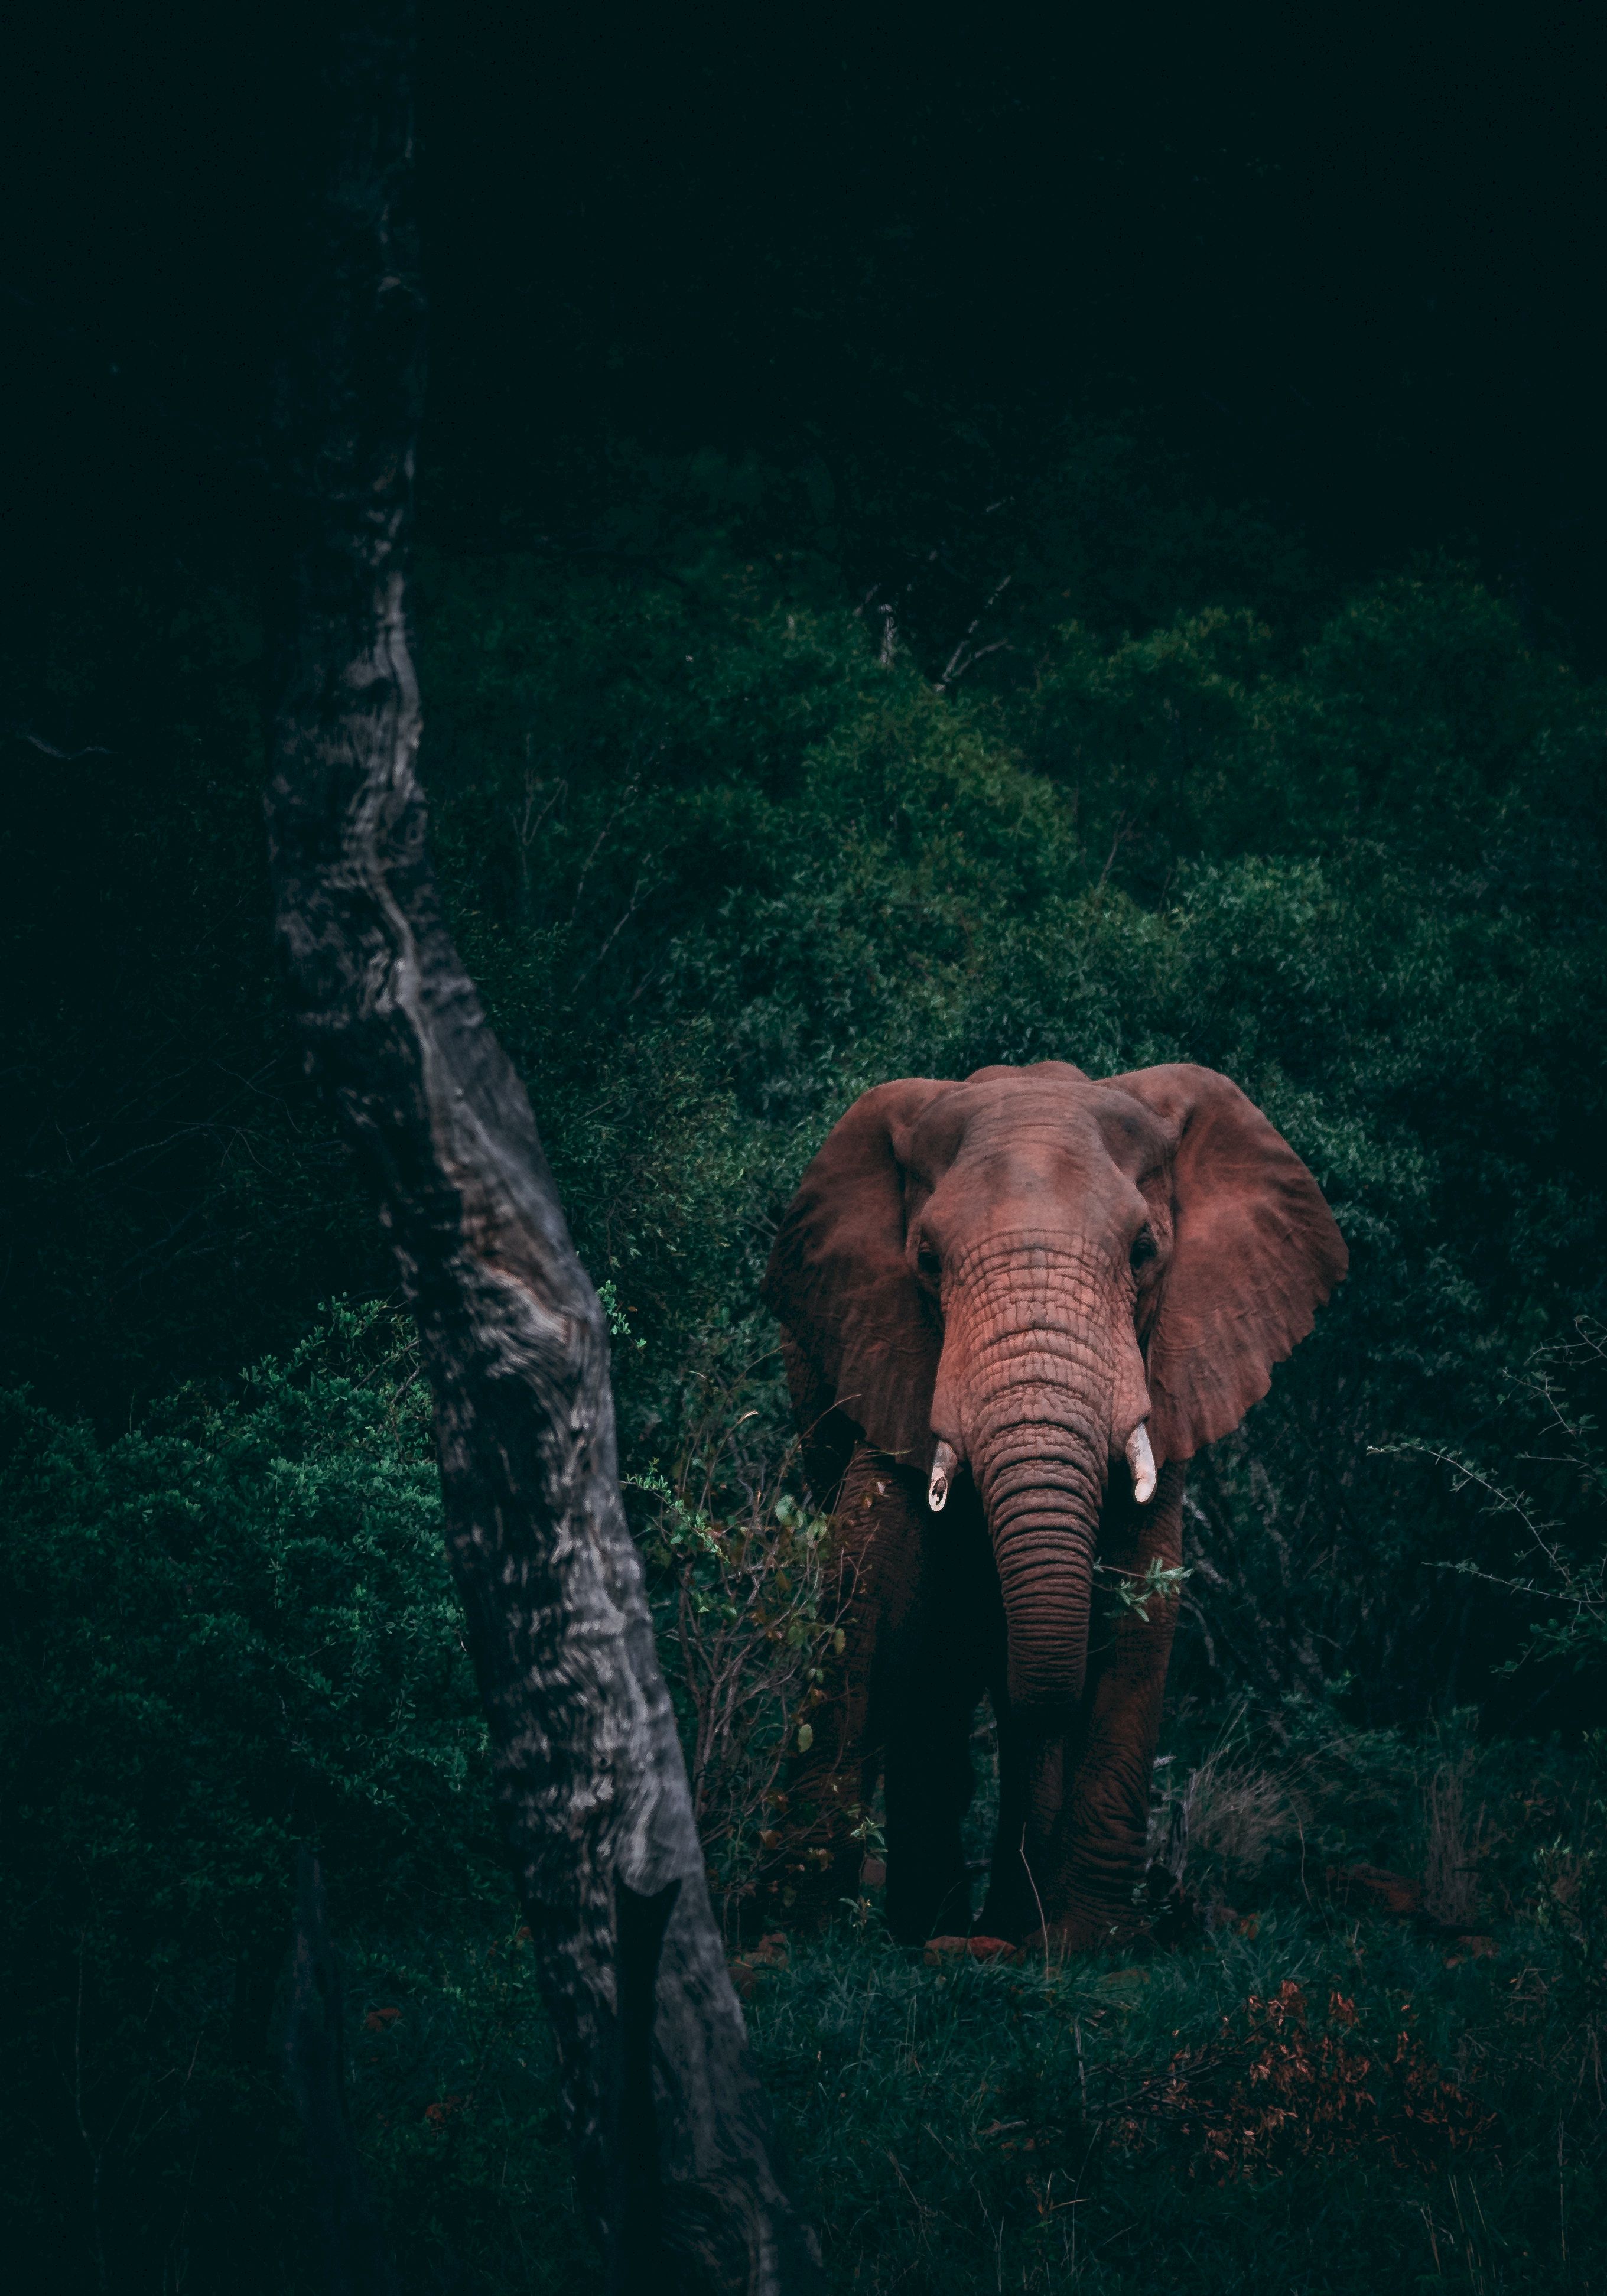 An elephant standing in the middle of a forest. - Elephant